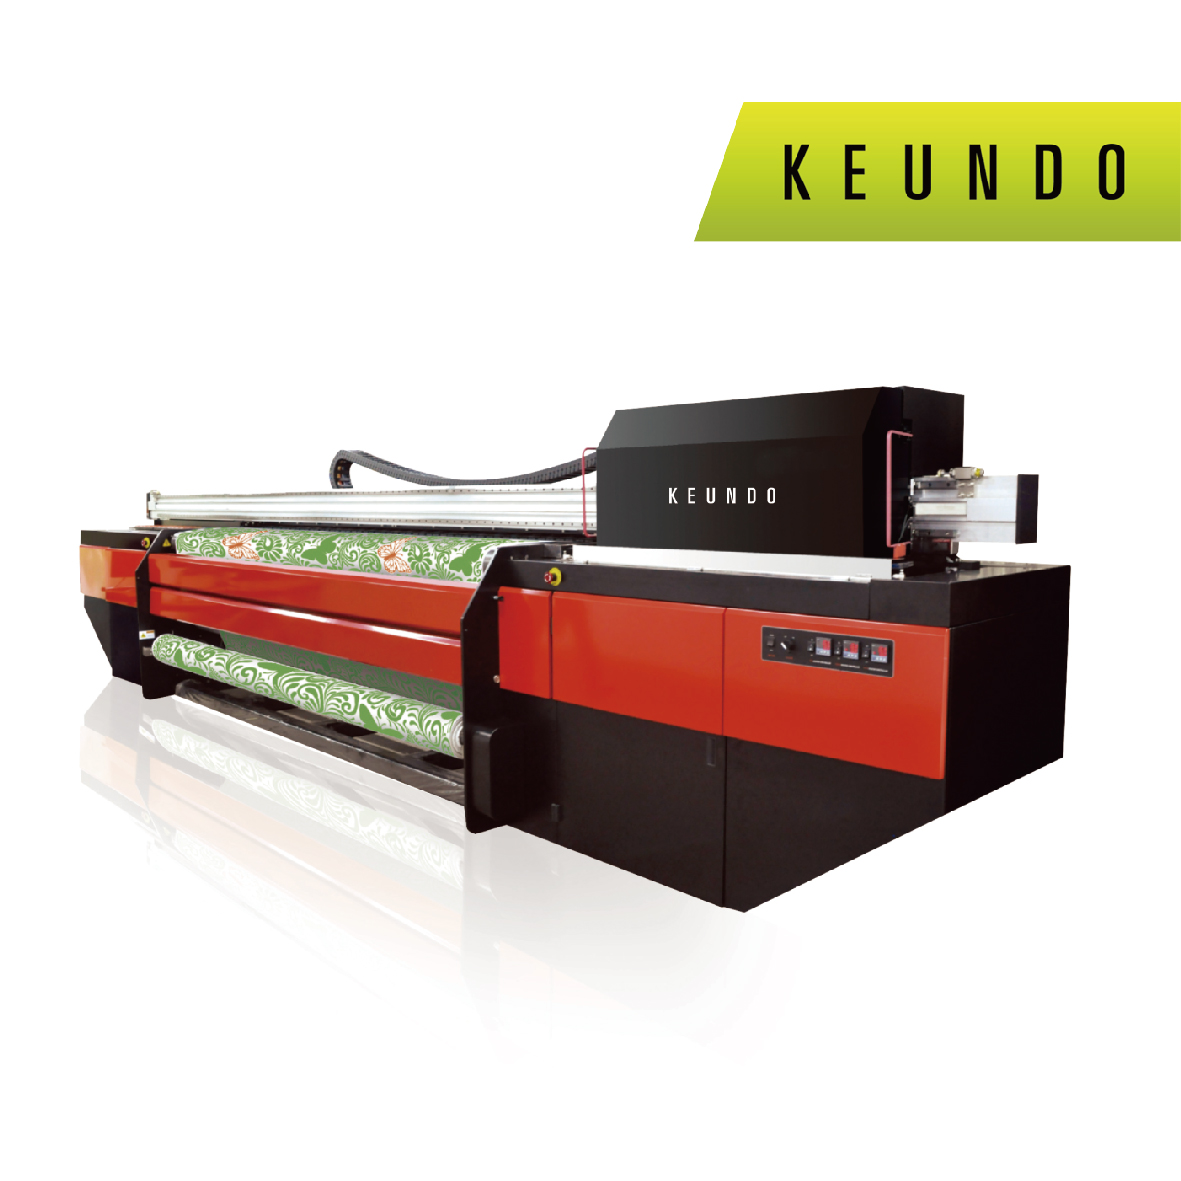 SUPRAQ 3200 -TX12 Grand Format Dye Sublimation System With Twelve SG-1024 Print Heads